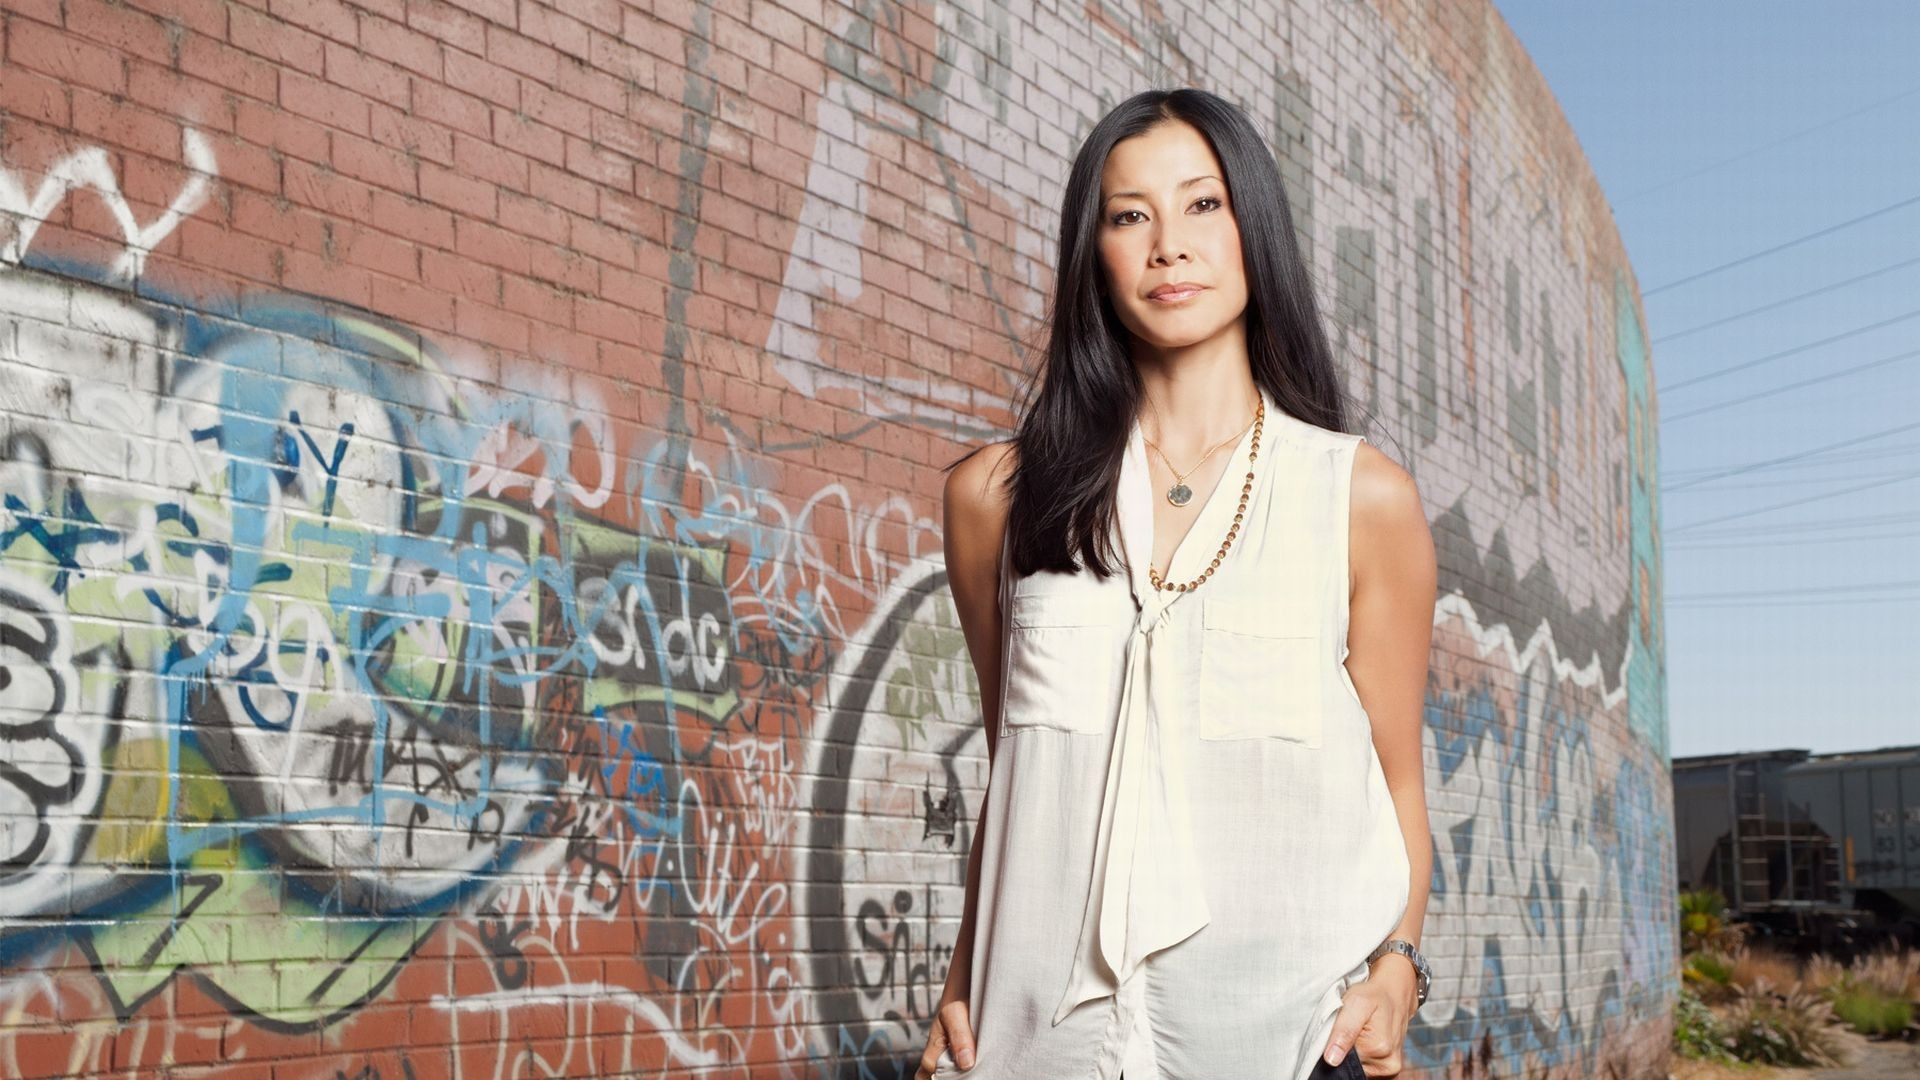 Show Our America with Lisa Ling